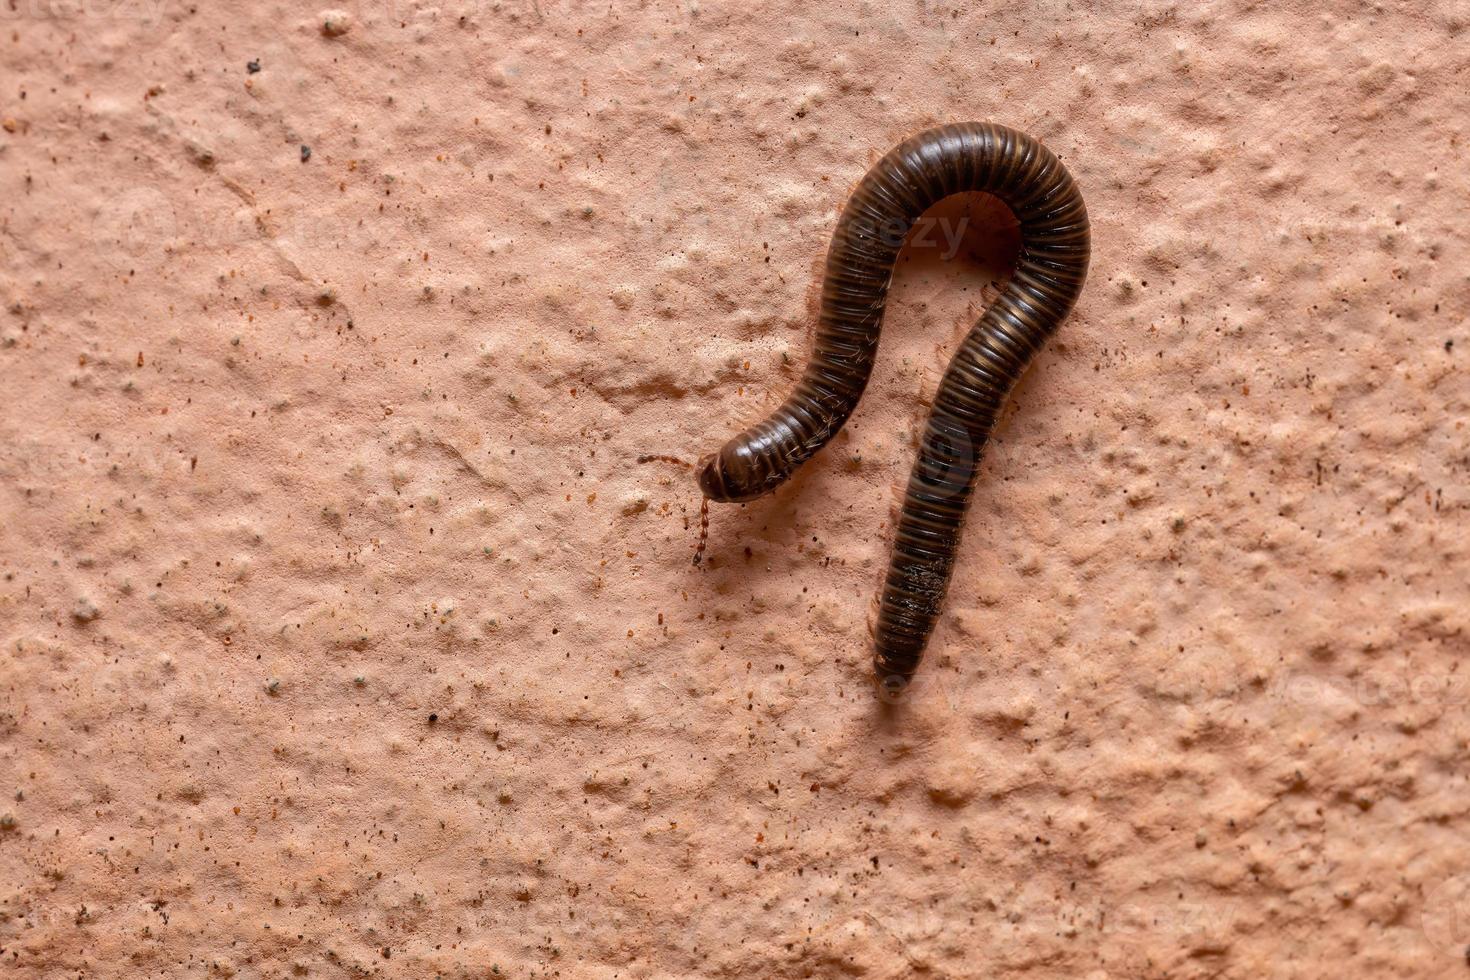 Parajulid Millipede with selective focus photo